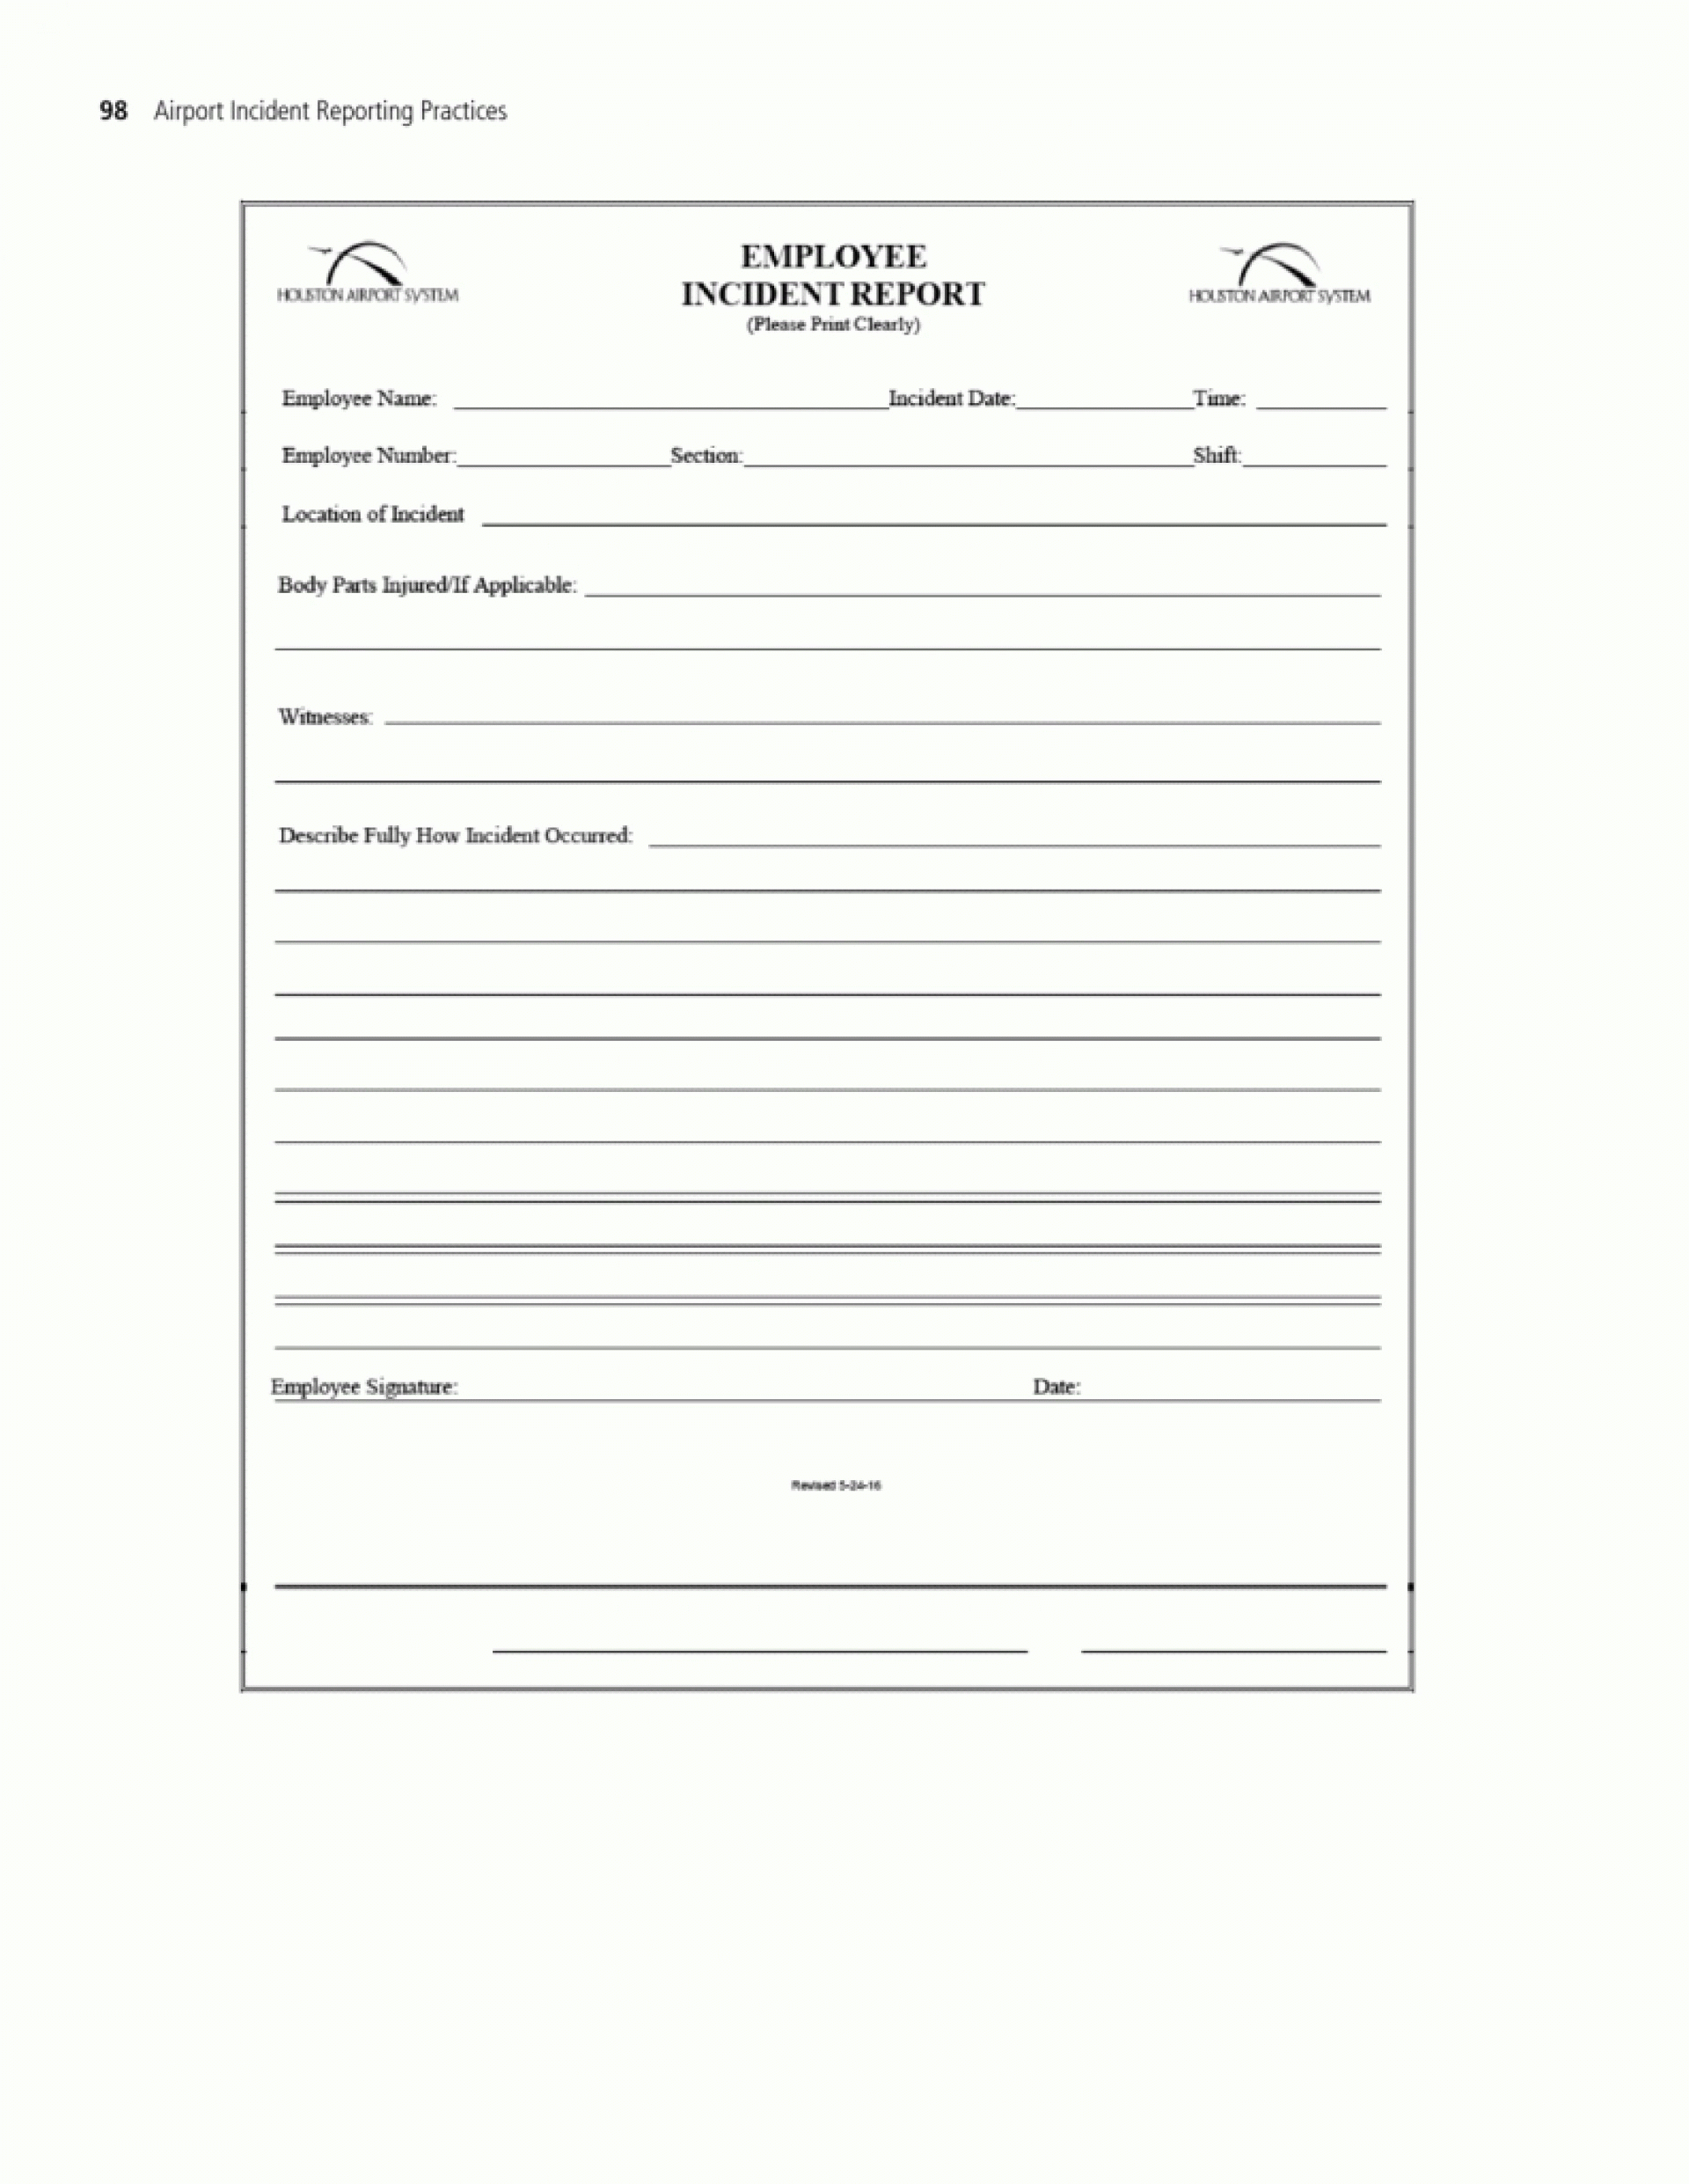 024 Wholesale Application Form 788X1114 Template Ideas New With Regard To Incident Report Form Template Qld